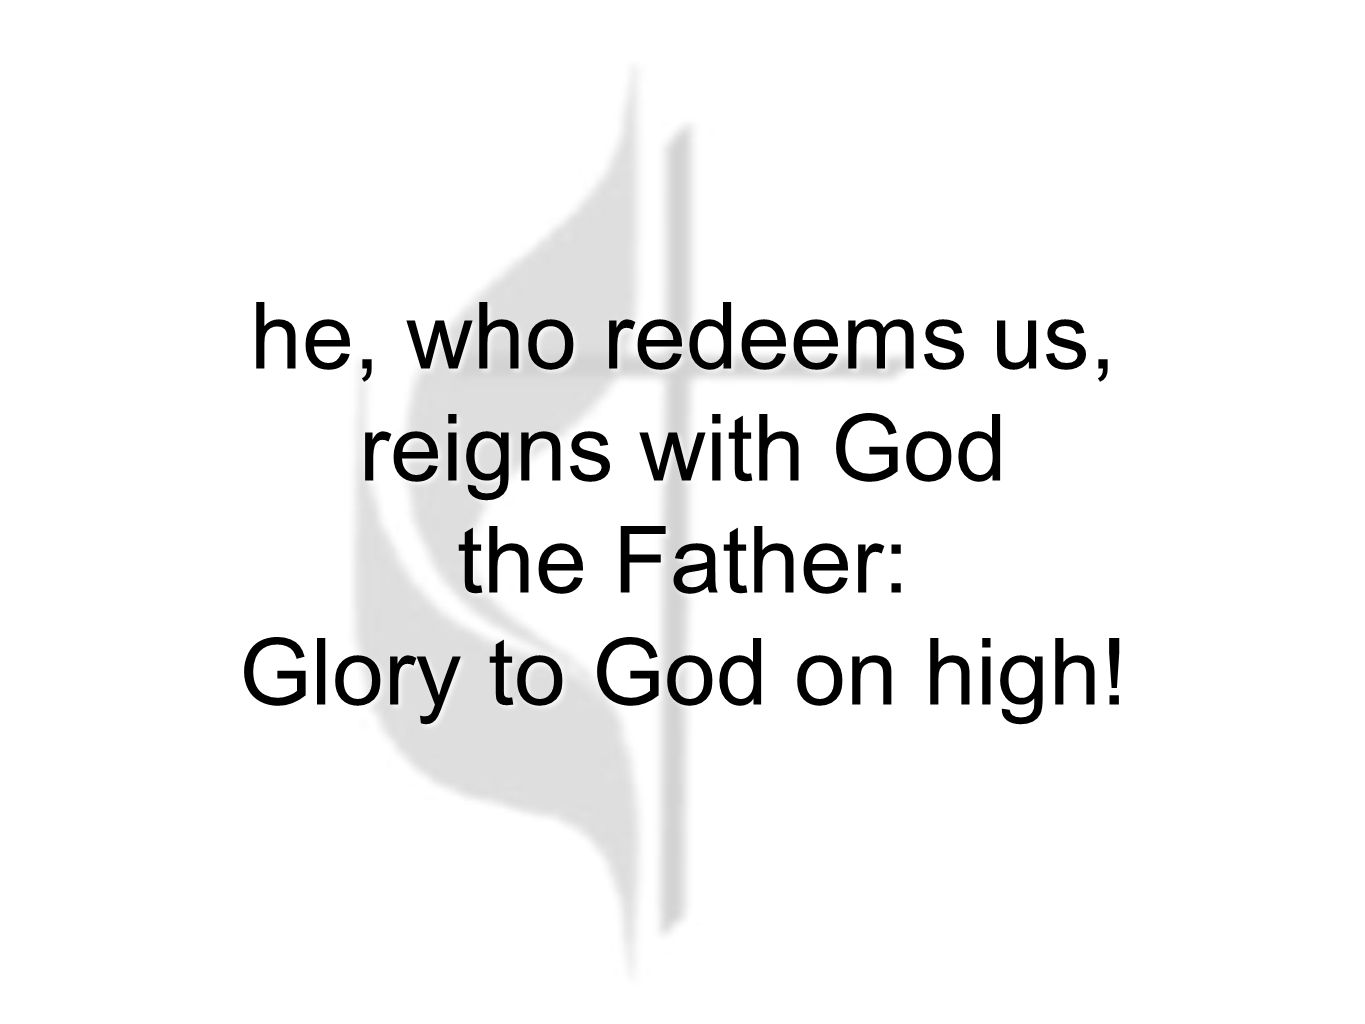 he, who redeems us, reigns with God the Father: Glory to God on high!